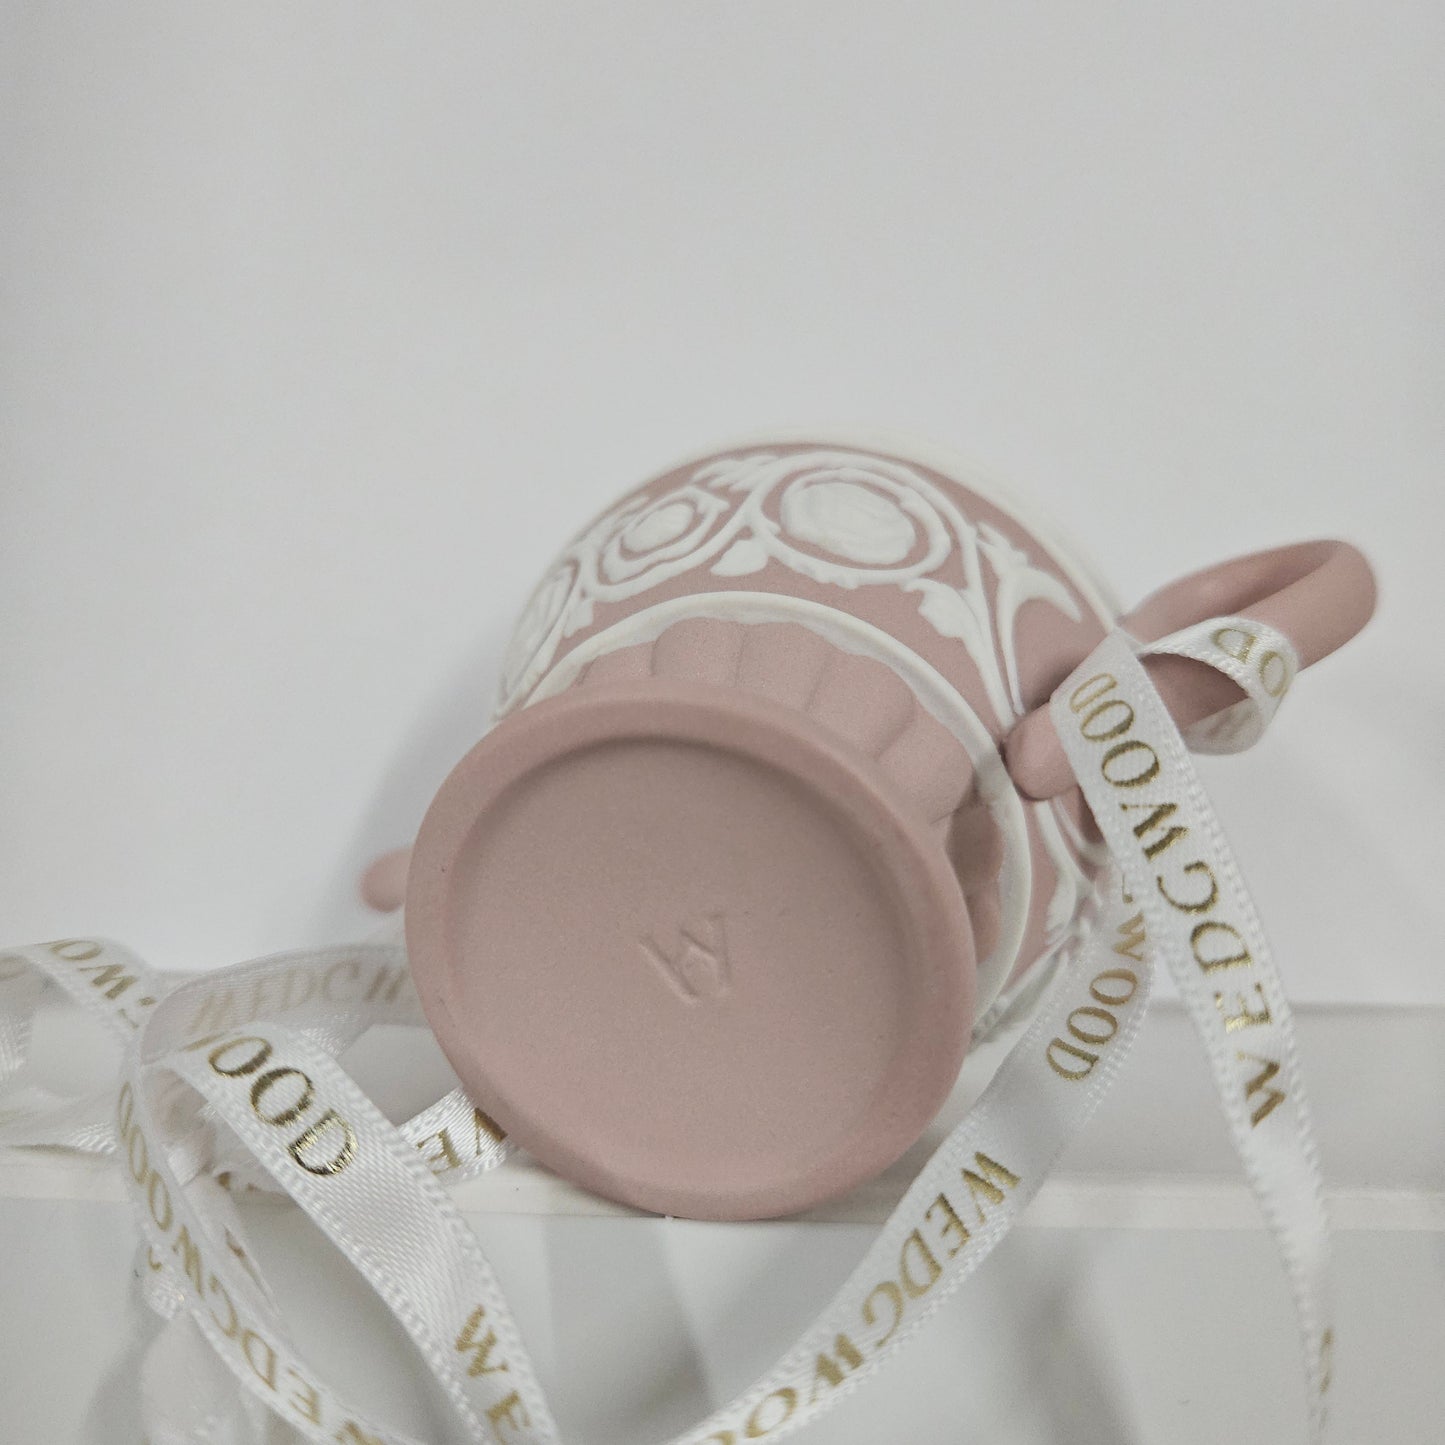 Wedgewood Pink White Hanging Teapot Ornament